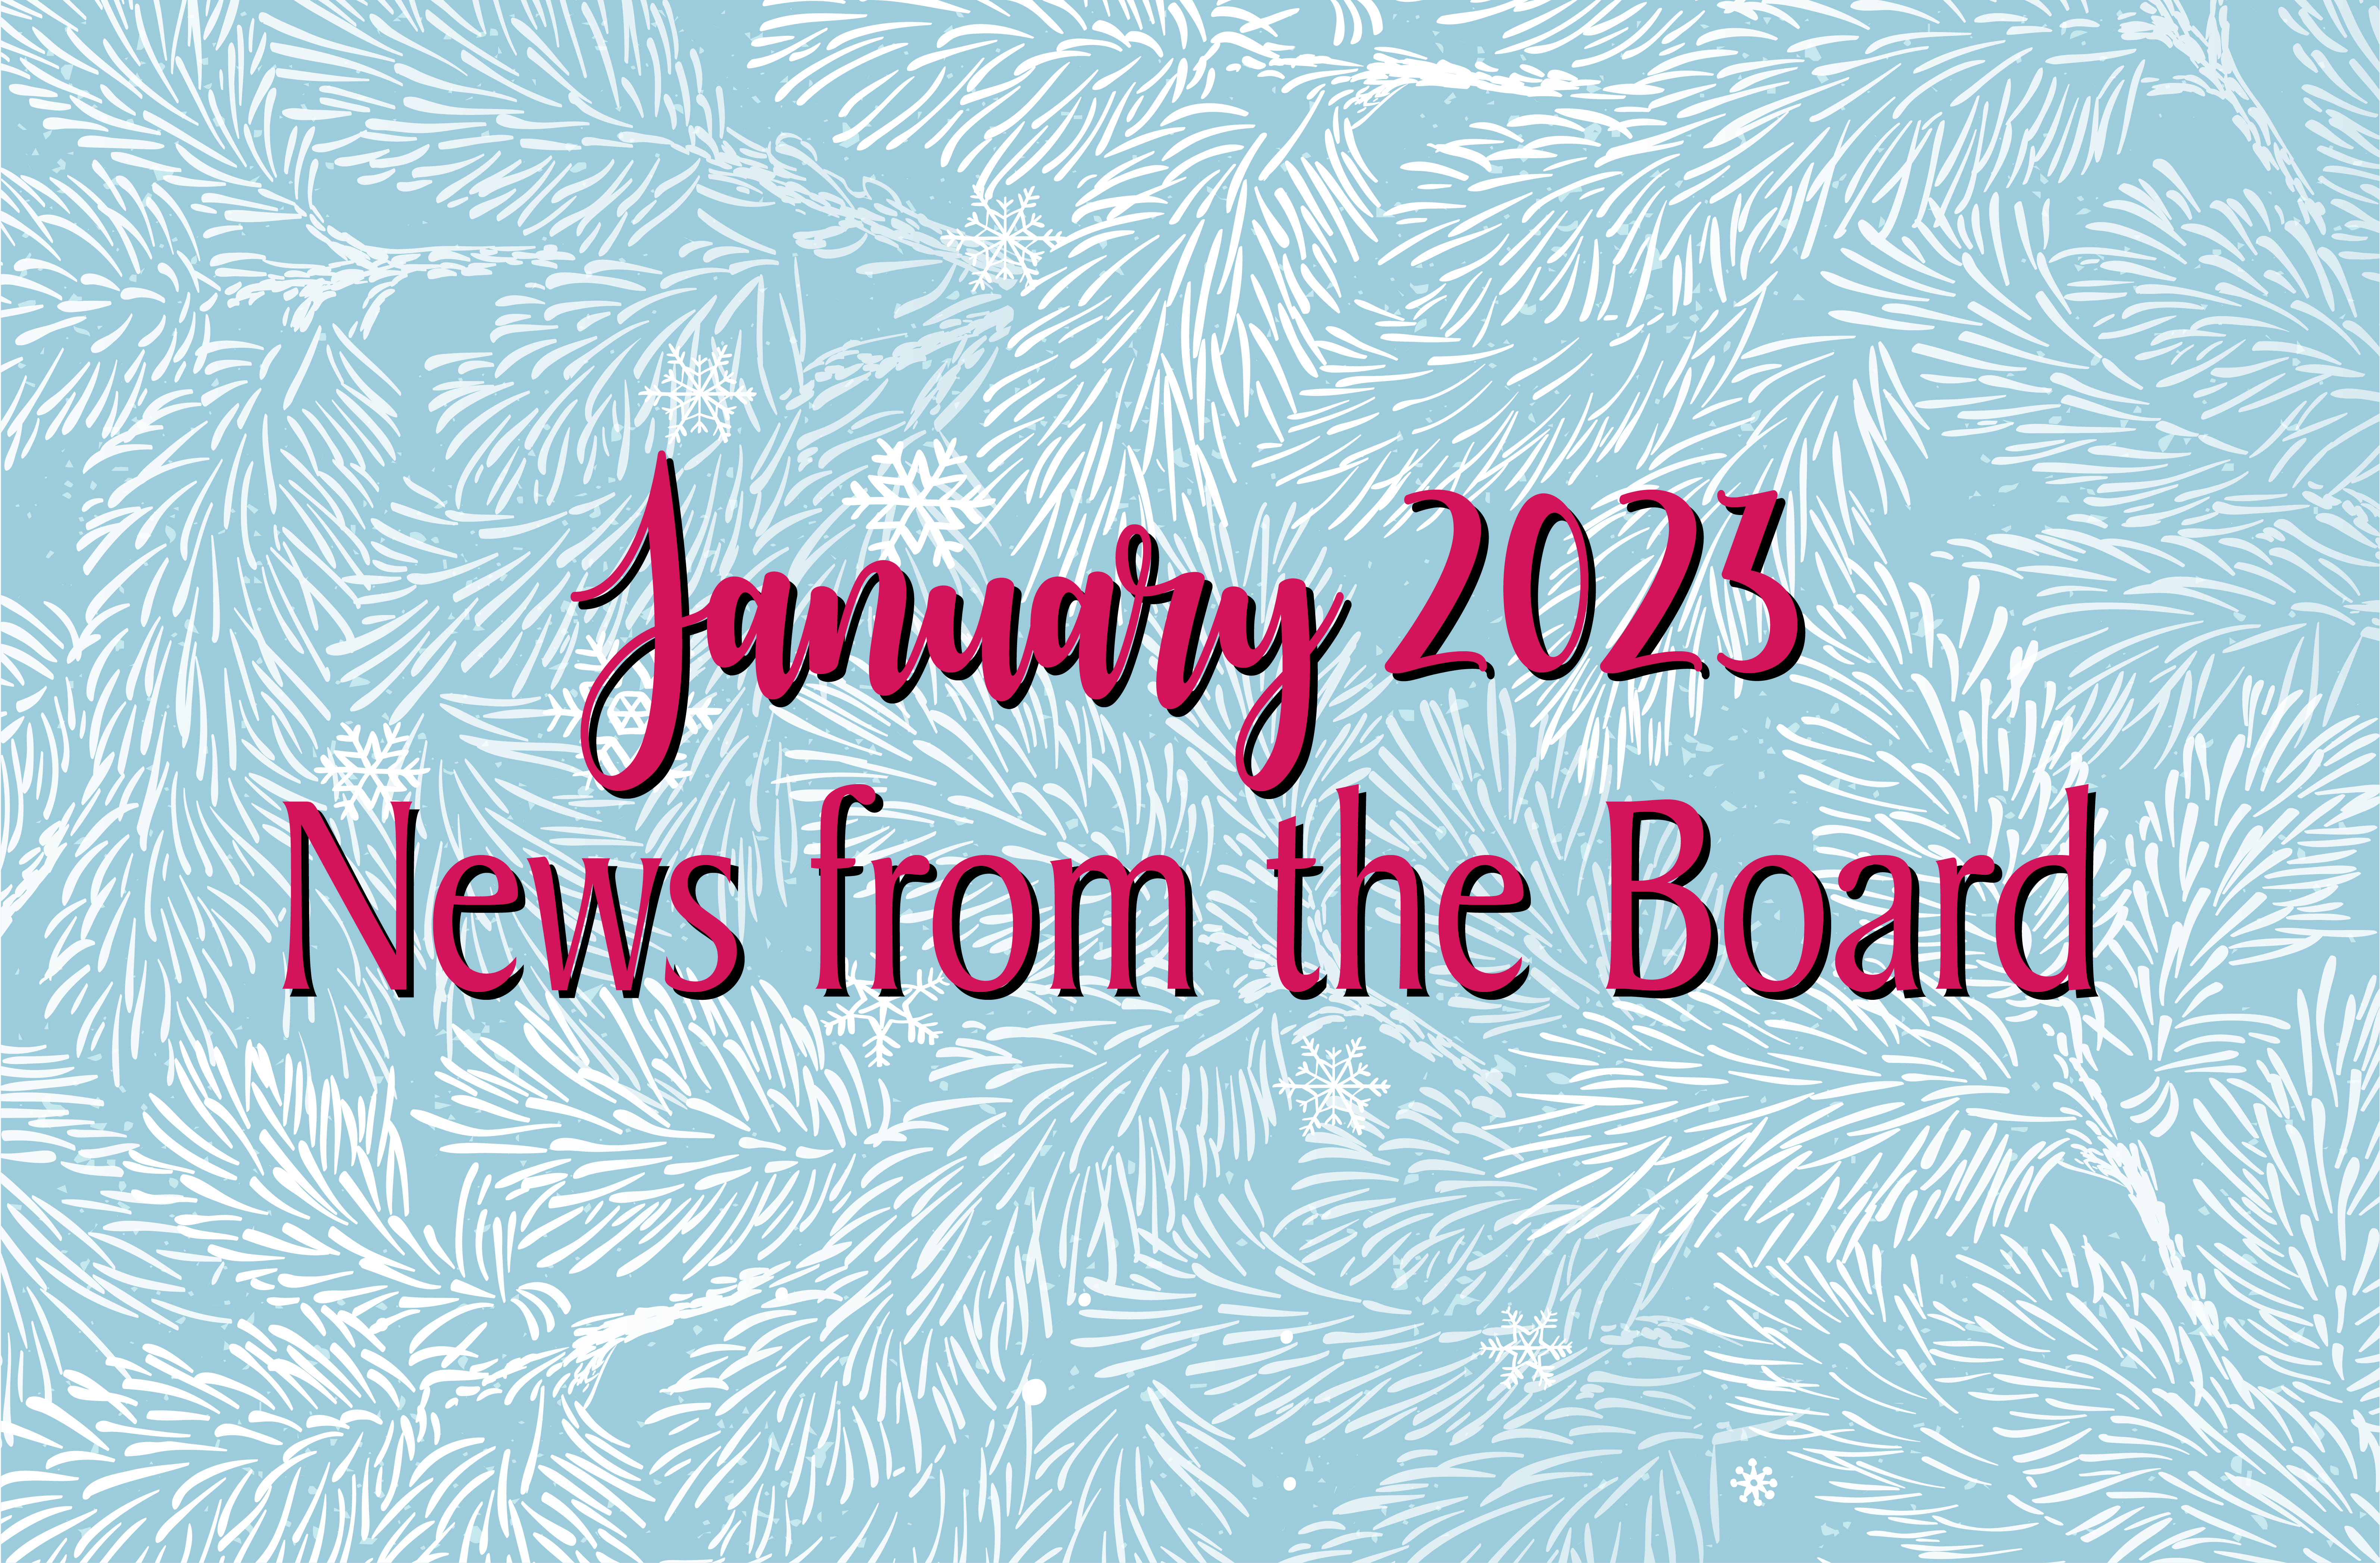 Georgetown Colony 1 News from the Board - January 2023